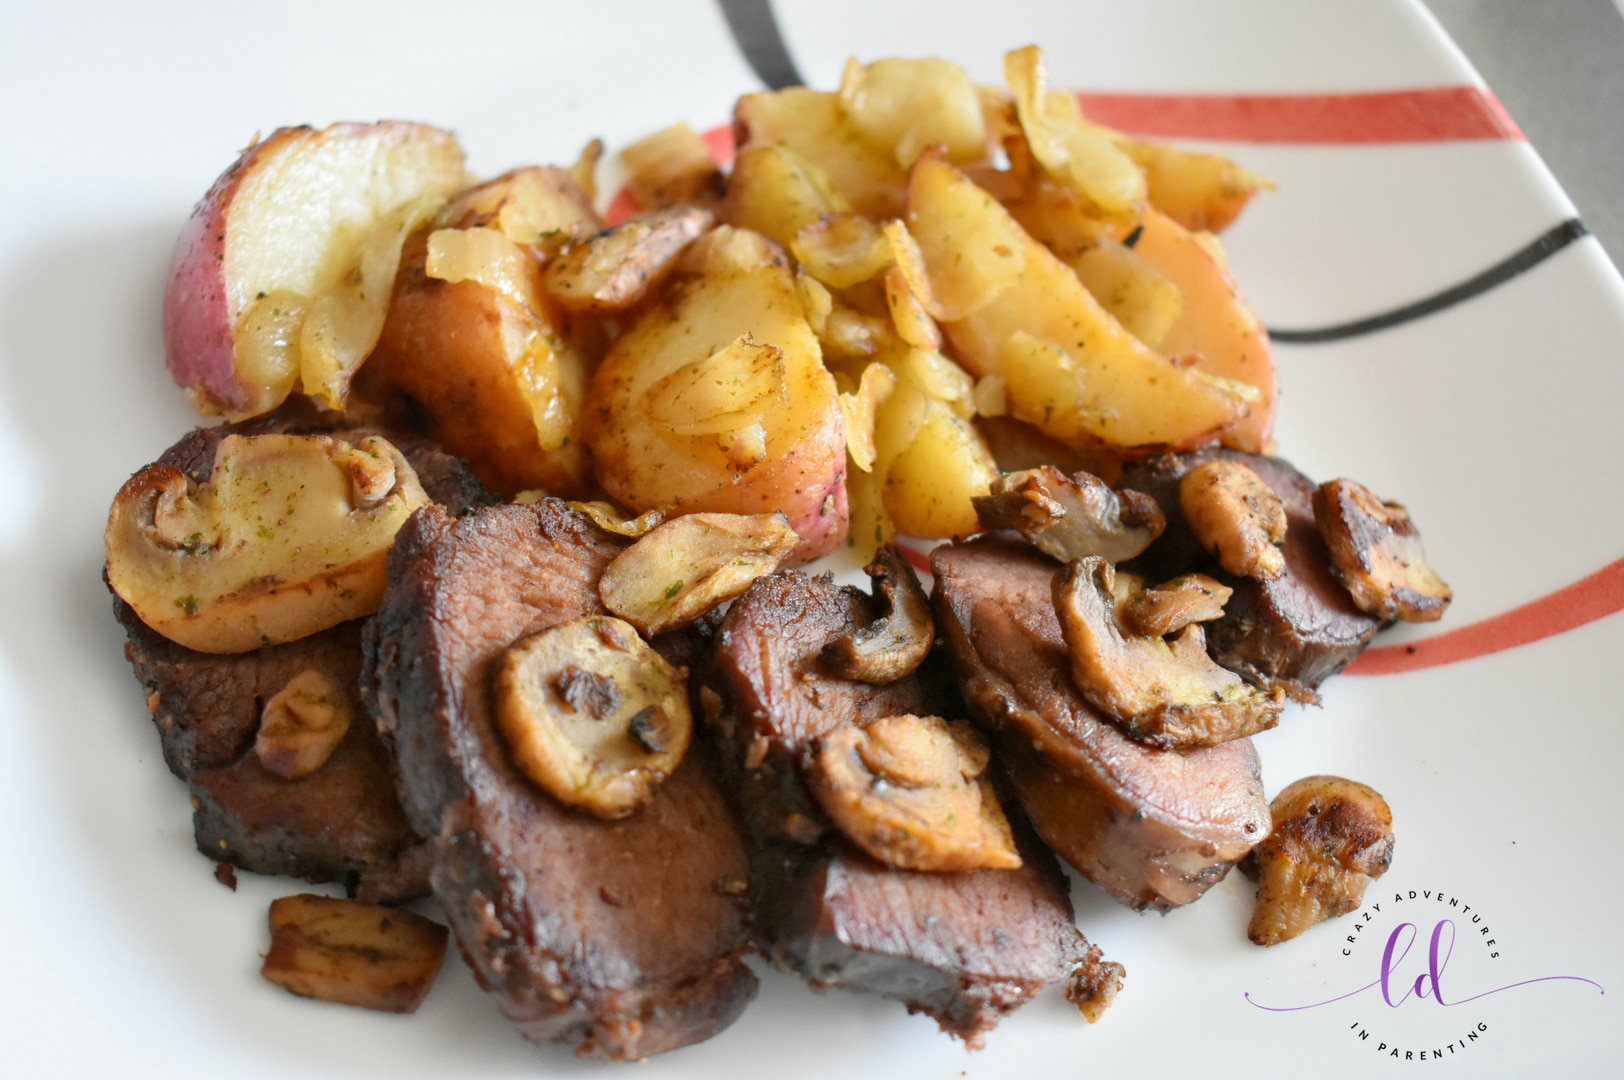 Tyson Fully Cooked Dinner and Entrée Kit - Seasoned Steak Fillet & Mushrooms plated ready for sauce